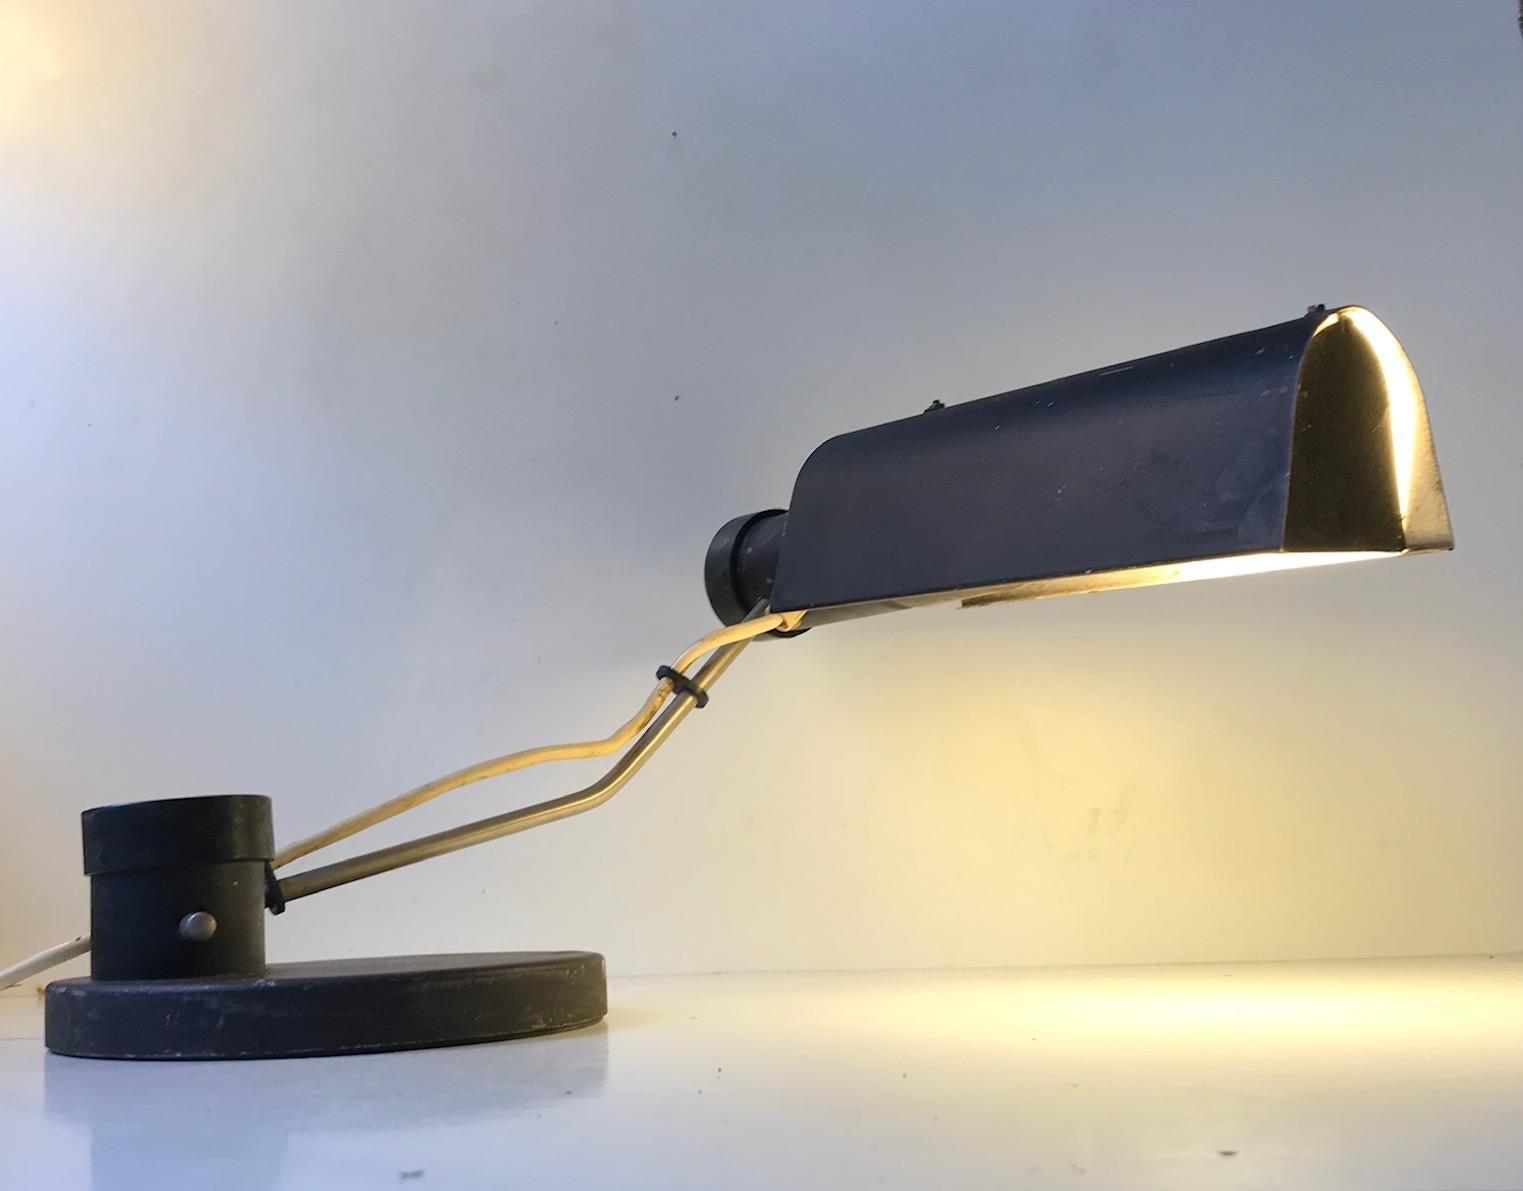 Low riding yet fully adjustable table lamp model TK 501, produced by VEB Metalldruecker in Halle, DDR during the 1960s. Original condition, unrestored, and with ware and patina.